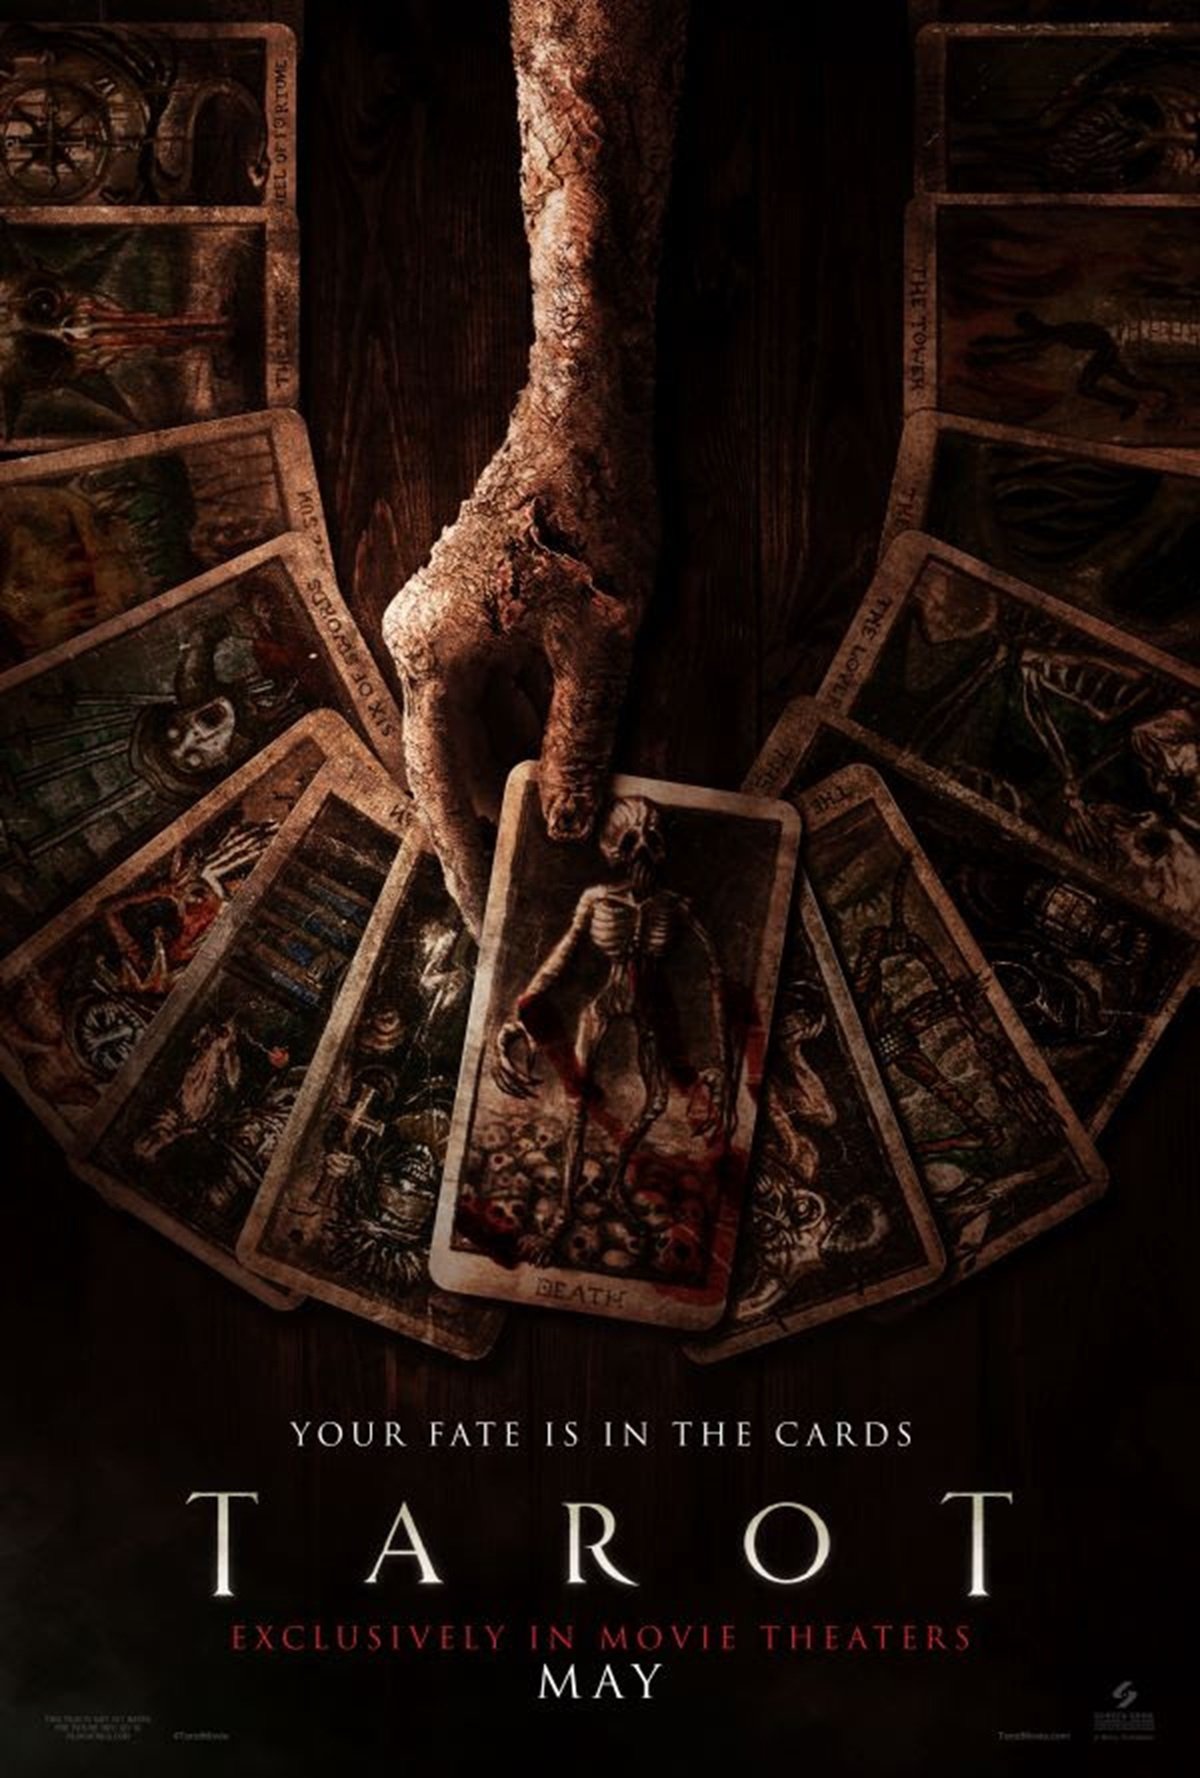 The poster art for Sony Pictures' upcoming horror film Tarot.